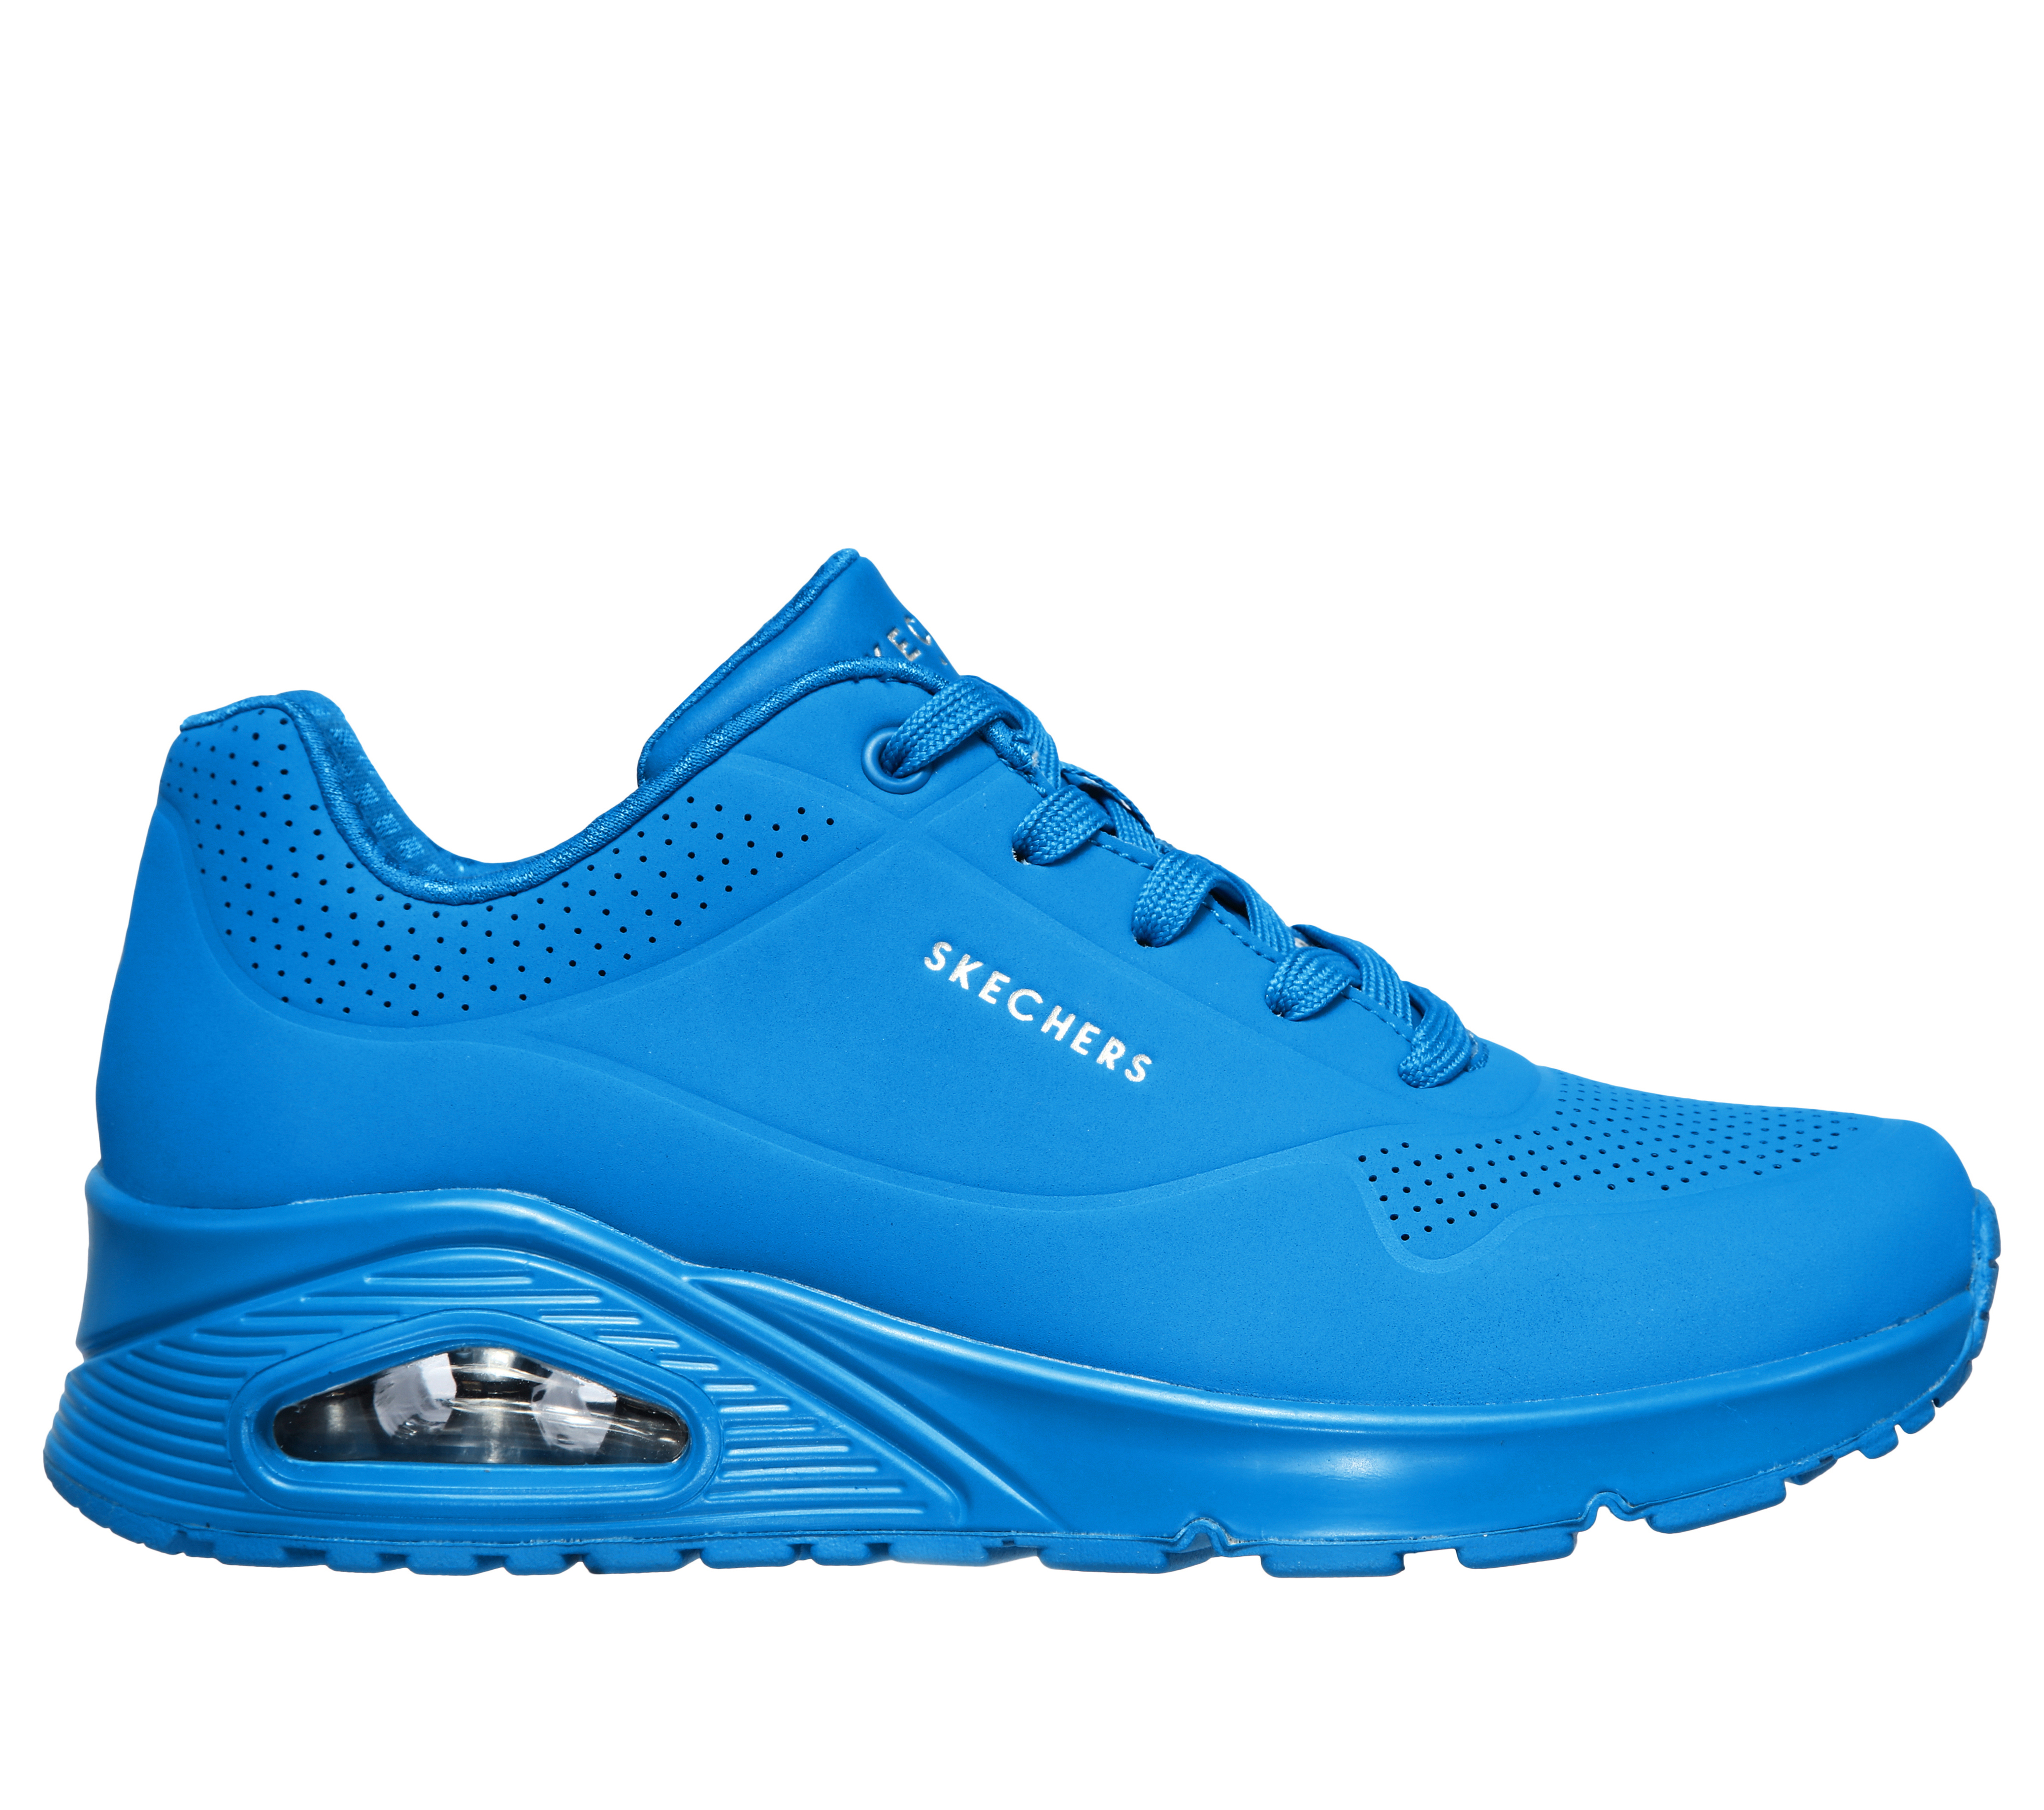 skechers highlights tennis shoes